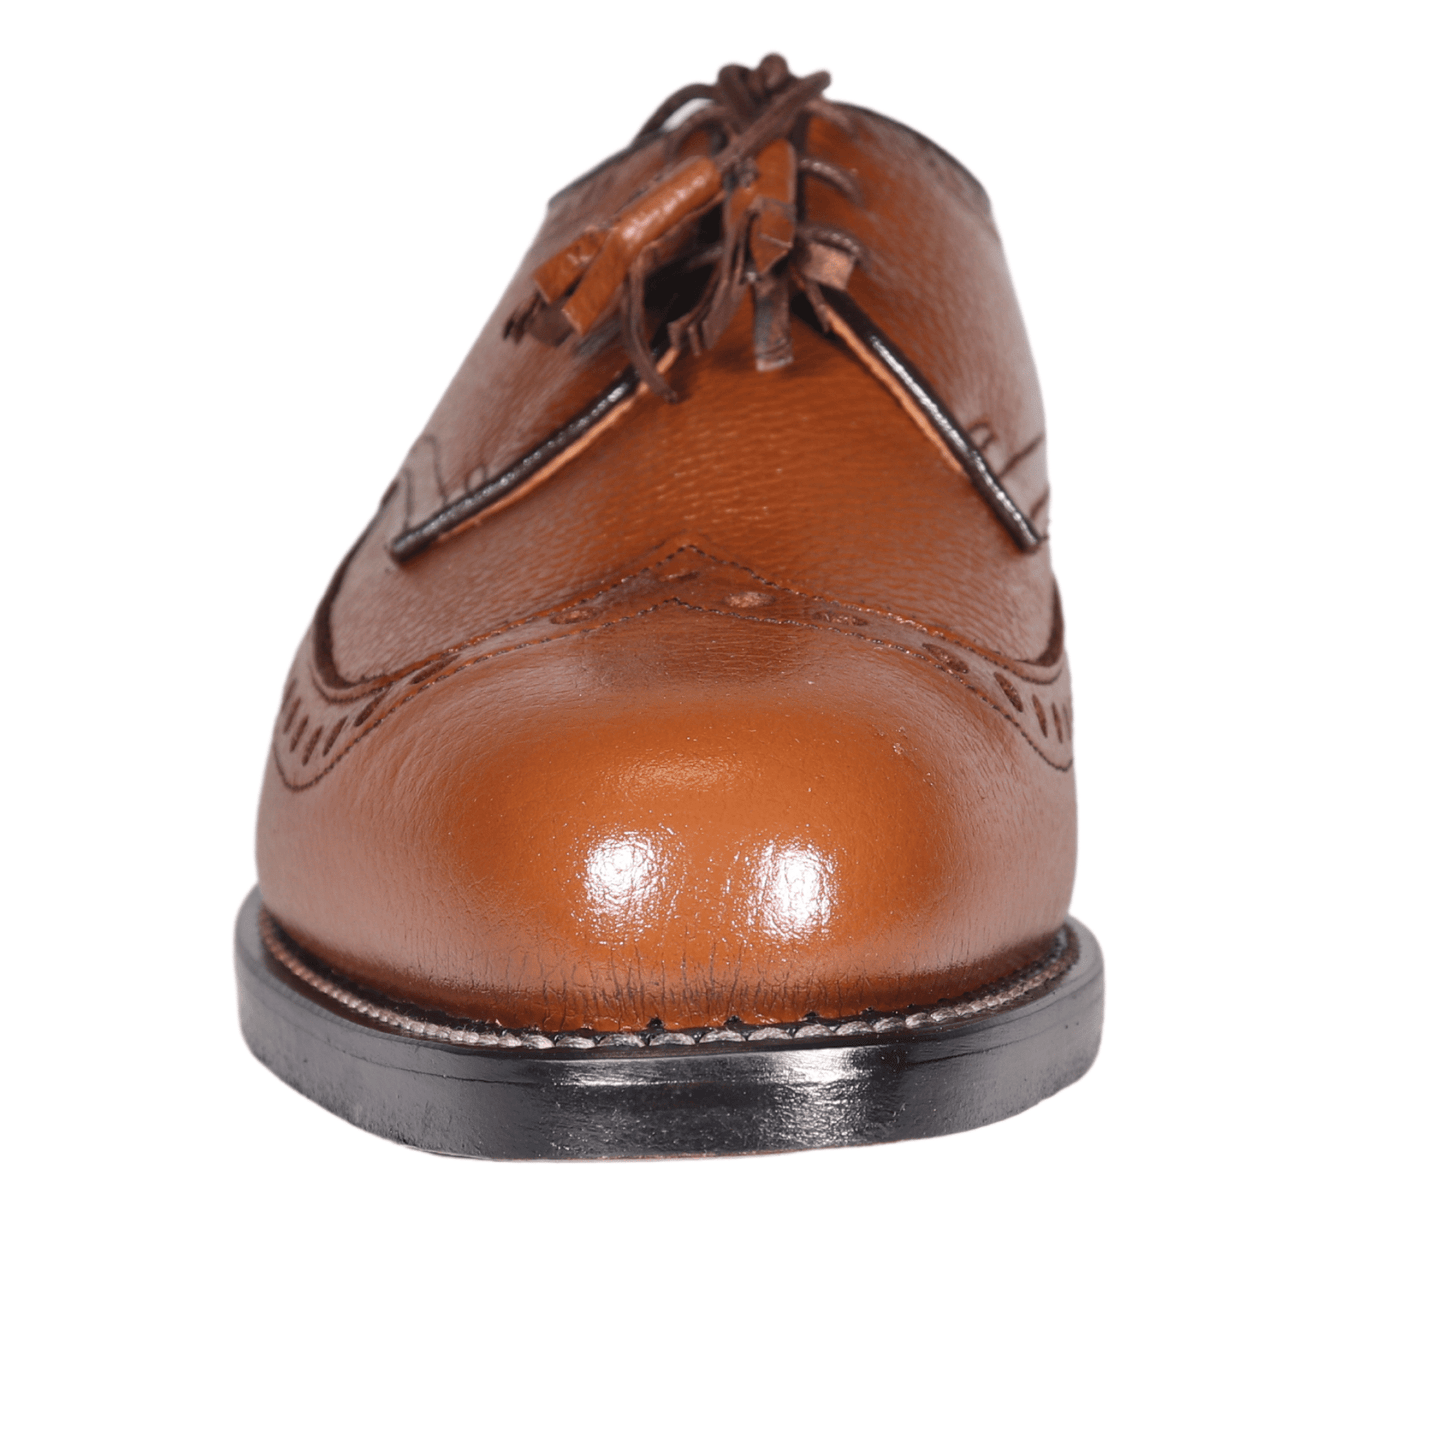 Johnston & Murphy Tan Derby Lace-up with Goodyear Welted Sole